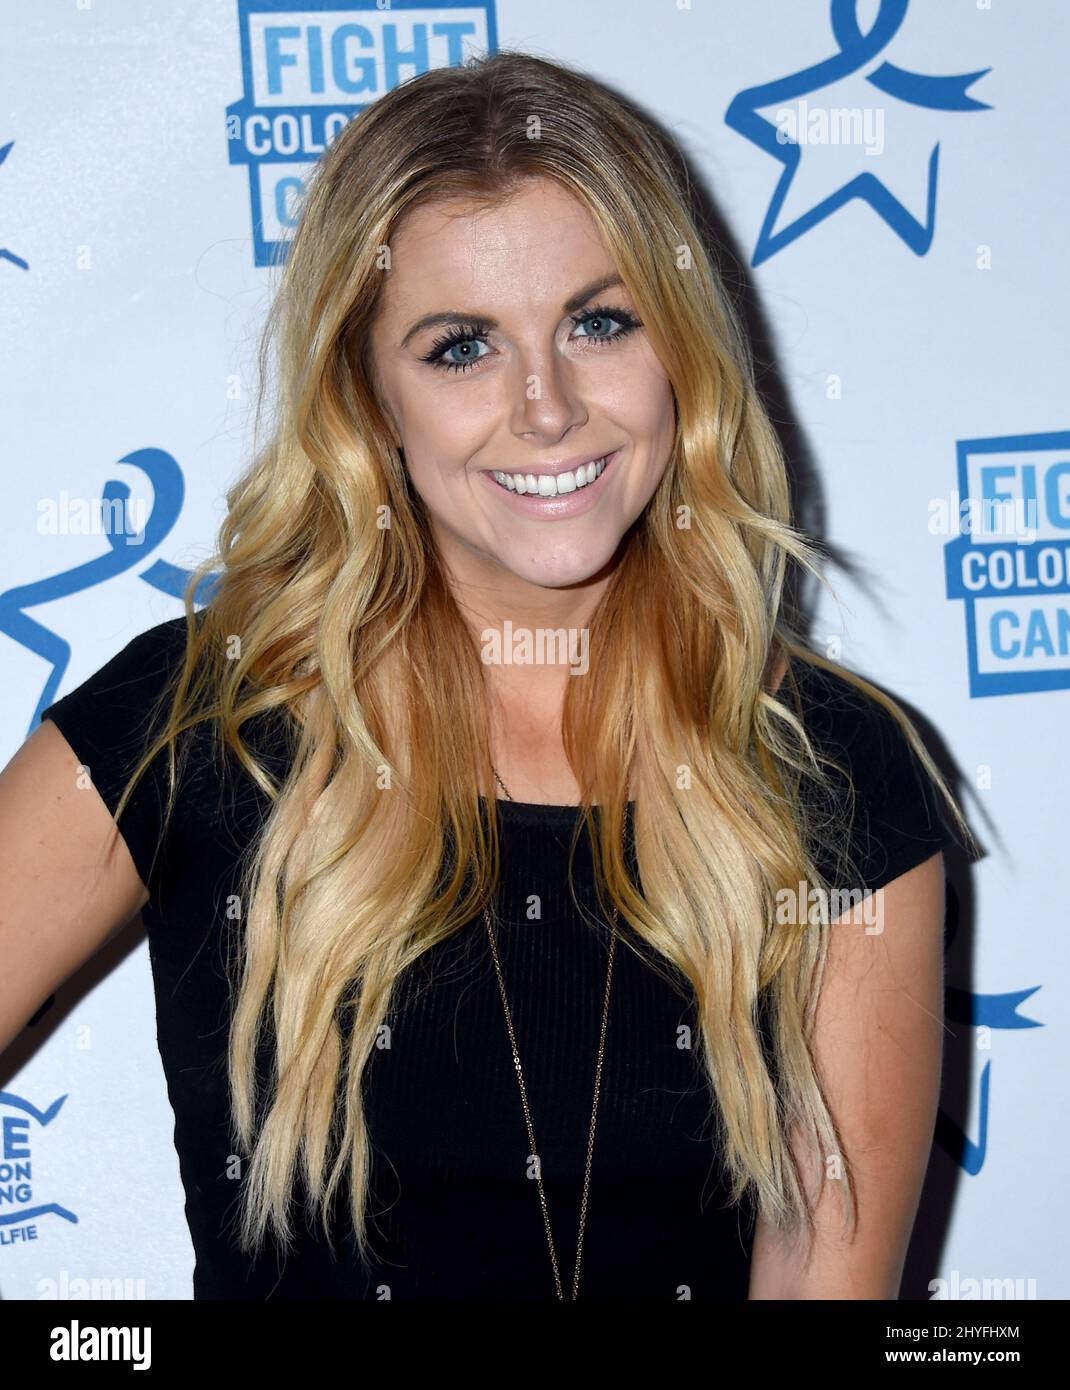 Lindsay Ell at the 6th Annual Craig Campbell Celebrity Cornhole Challenge benefitting the non-profit Fight Colorectal Cancer (Fight CRC) held at the City Winery on June 5, 2018 in Nashville, Tennessee Stock Photo